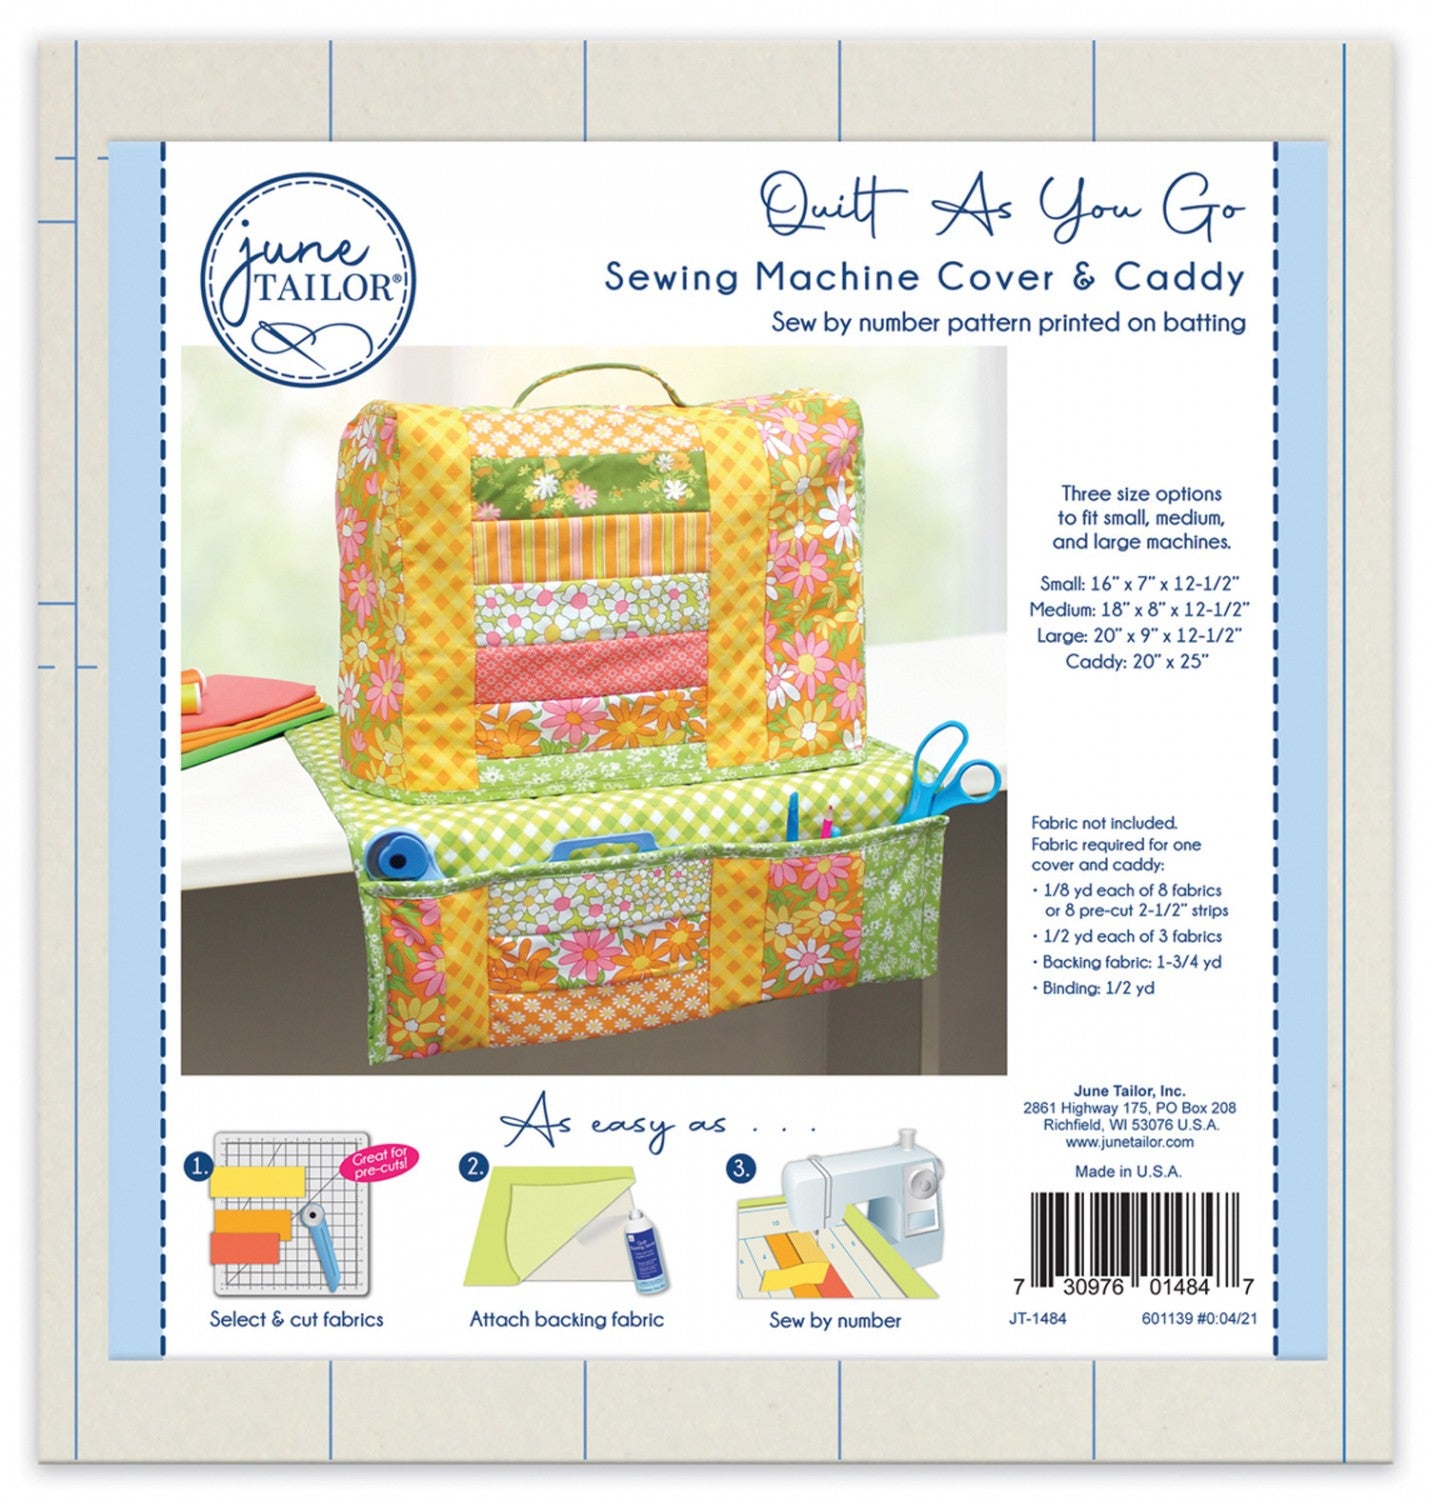 QUILT AS YOU GO SEWING MACHINE COVER & CADDY